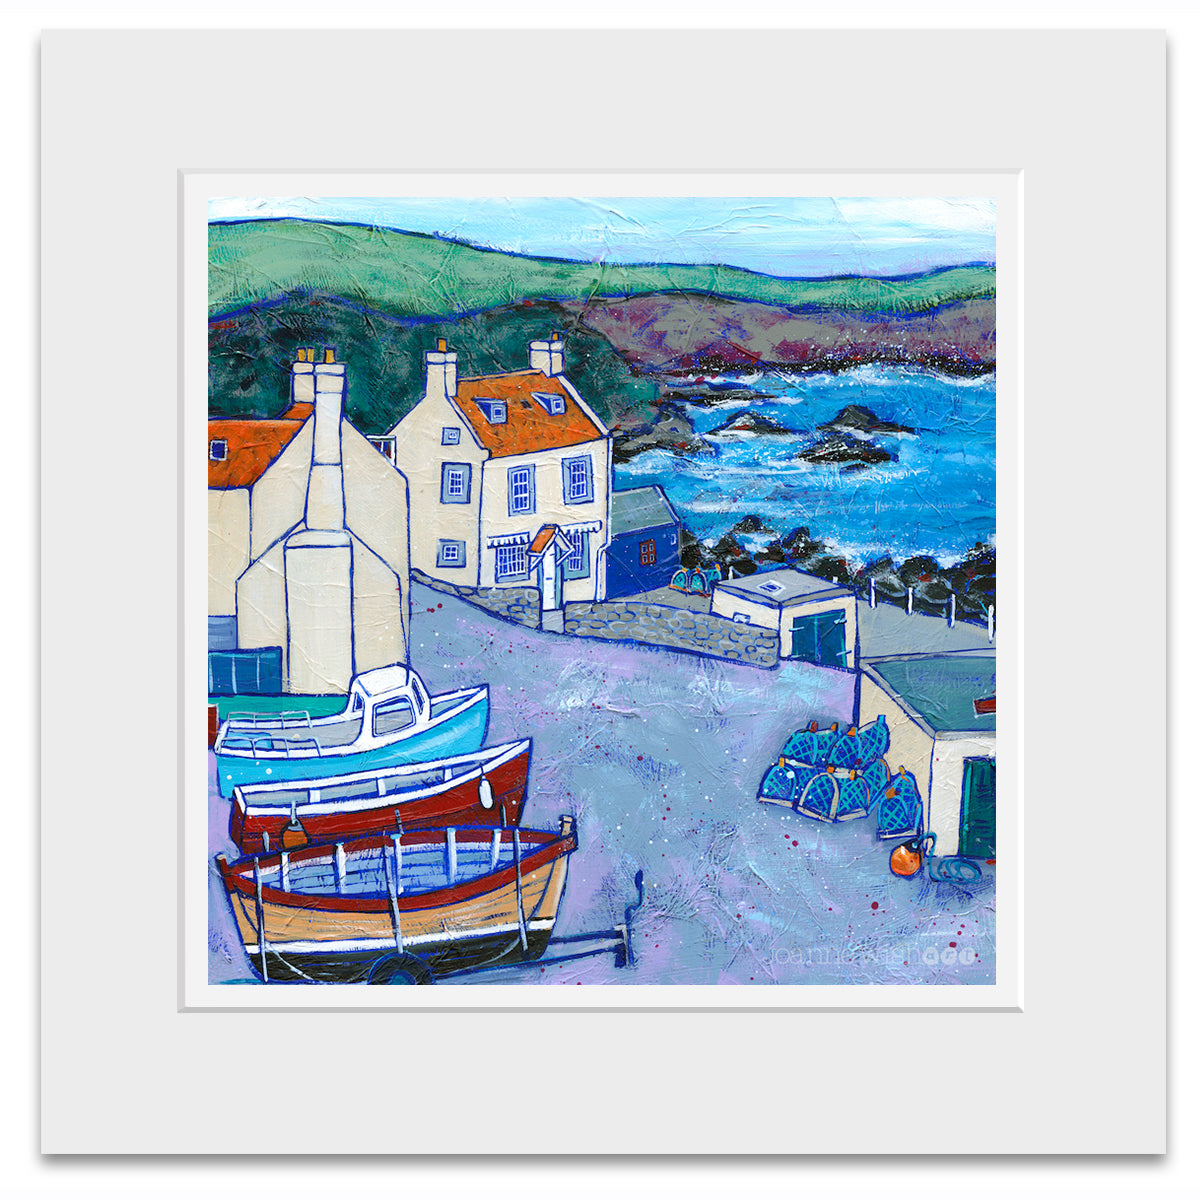 A mounted print of St Abbs cottages and fishing boats .